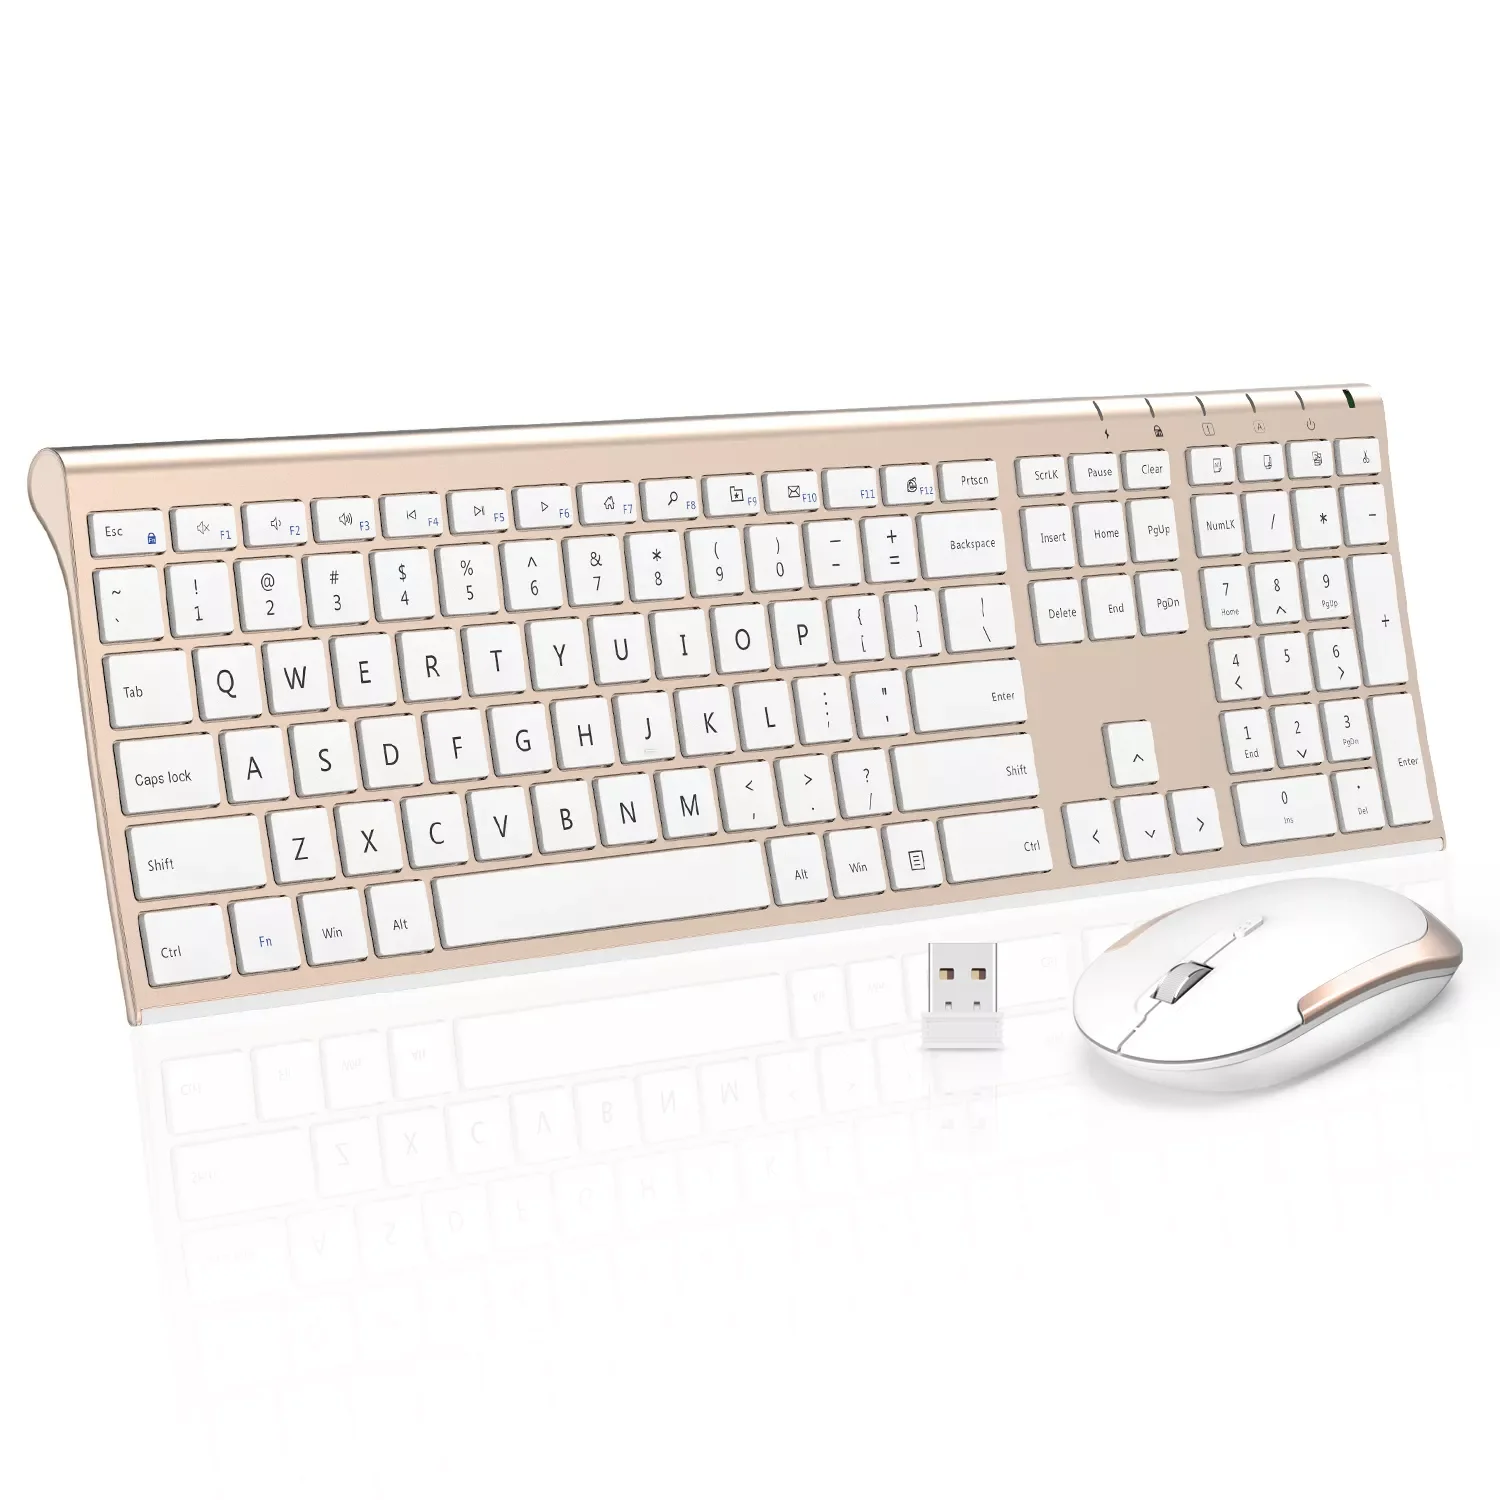 

Jelly Comb Wireless Keyboard and Mouse Combo 2.4GHz Ultra-Slim Aluminum Rechargeable Keyboard with Whisper-quiet Mouse for PC